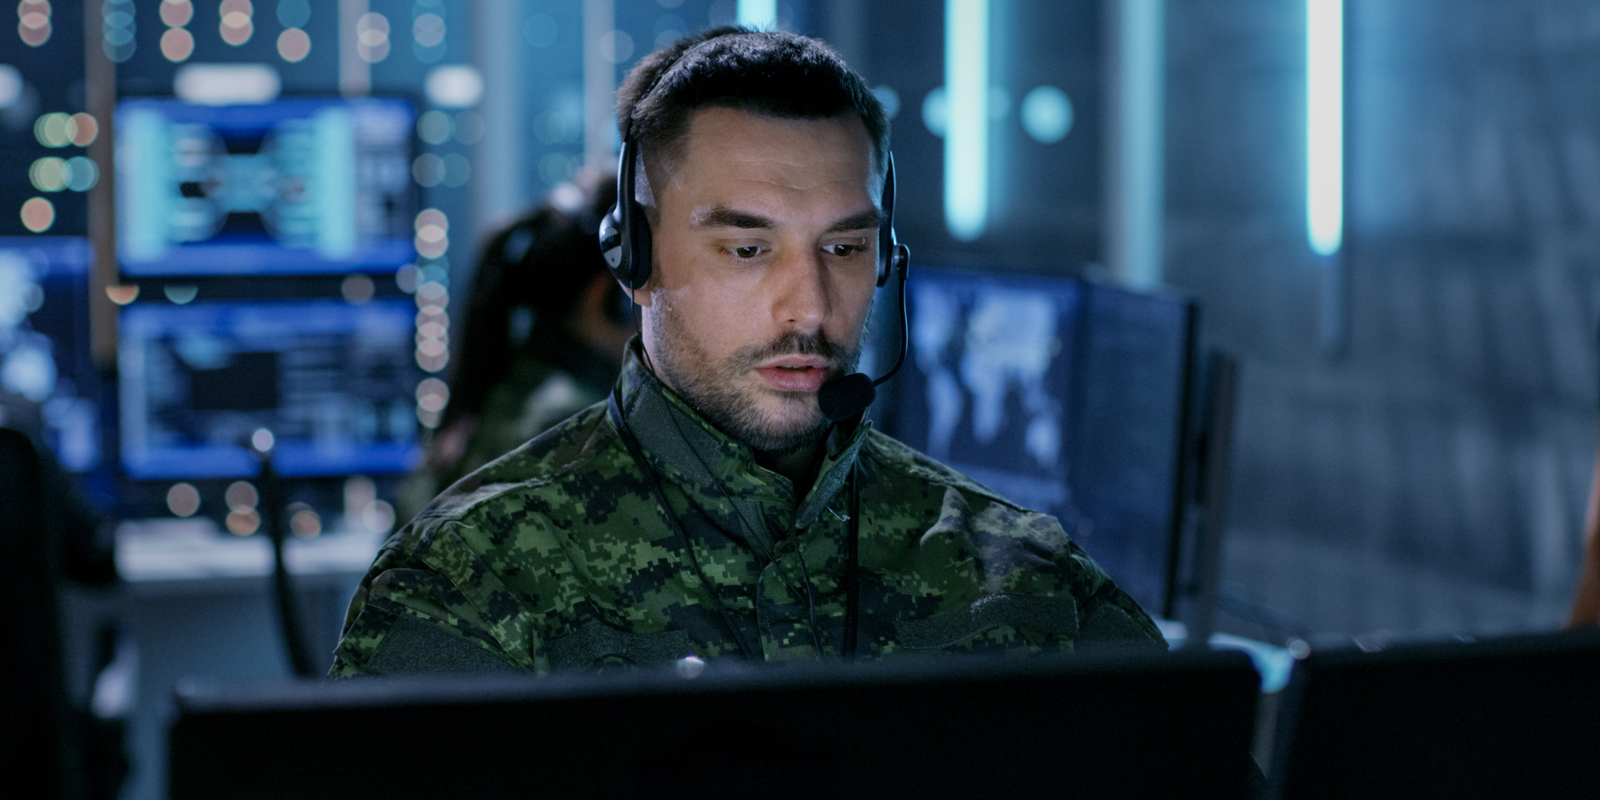 Person in camouflage and headset looks at computer screen